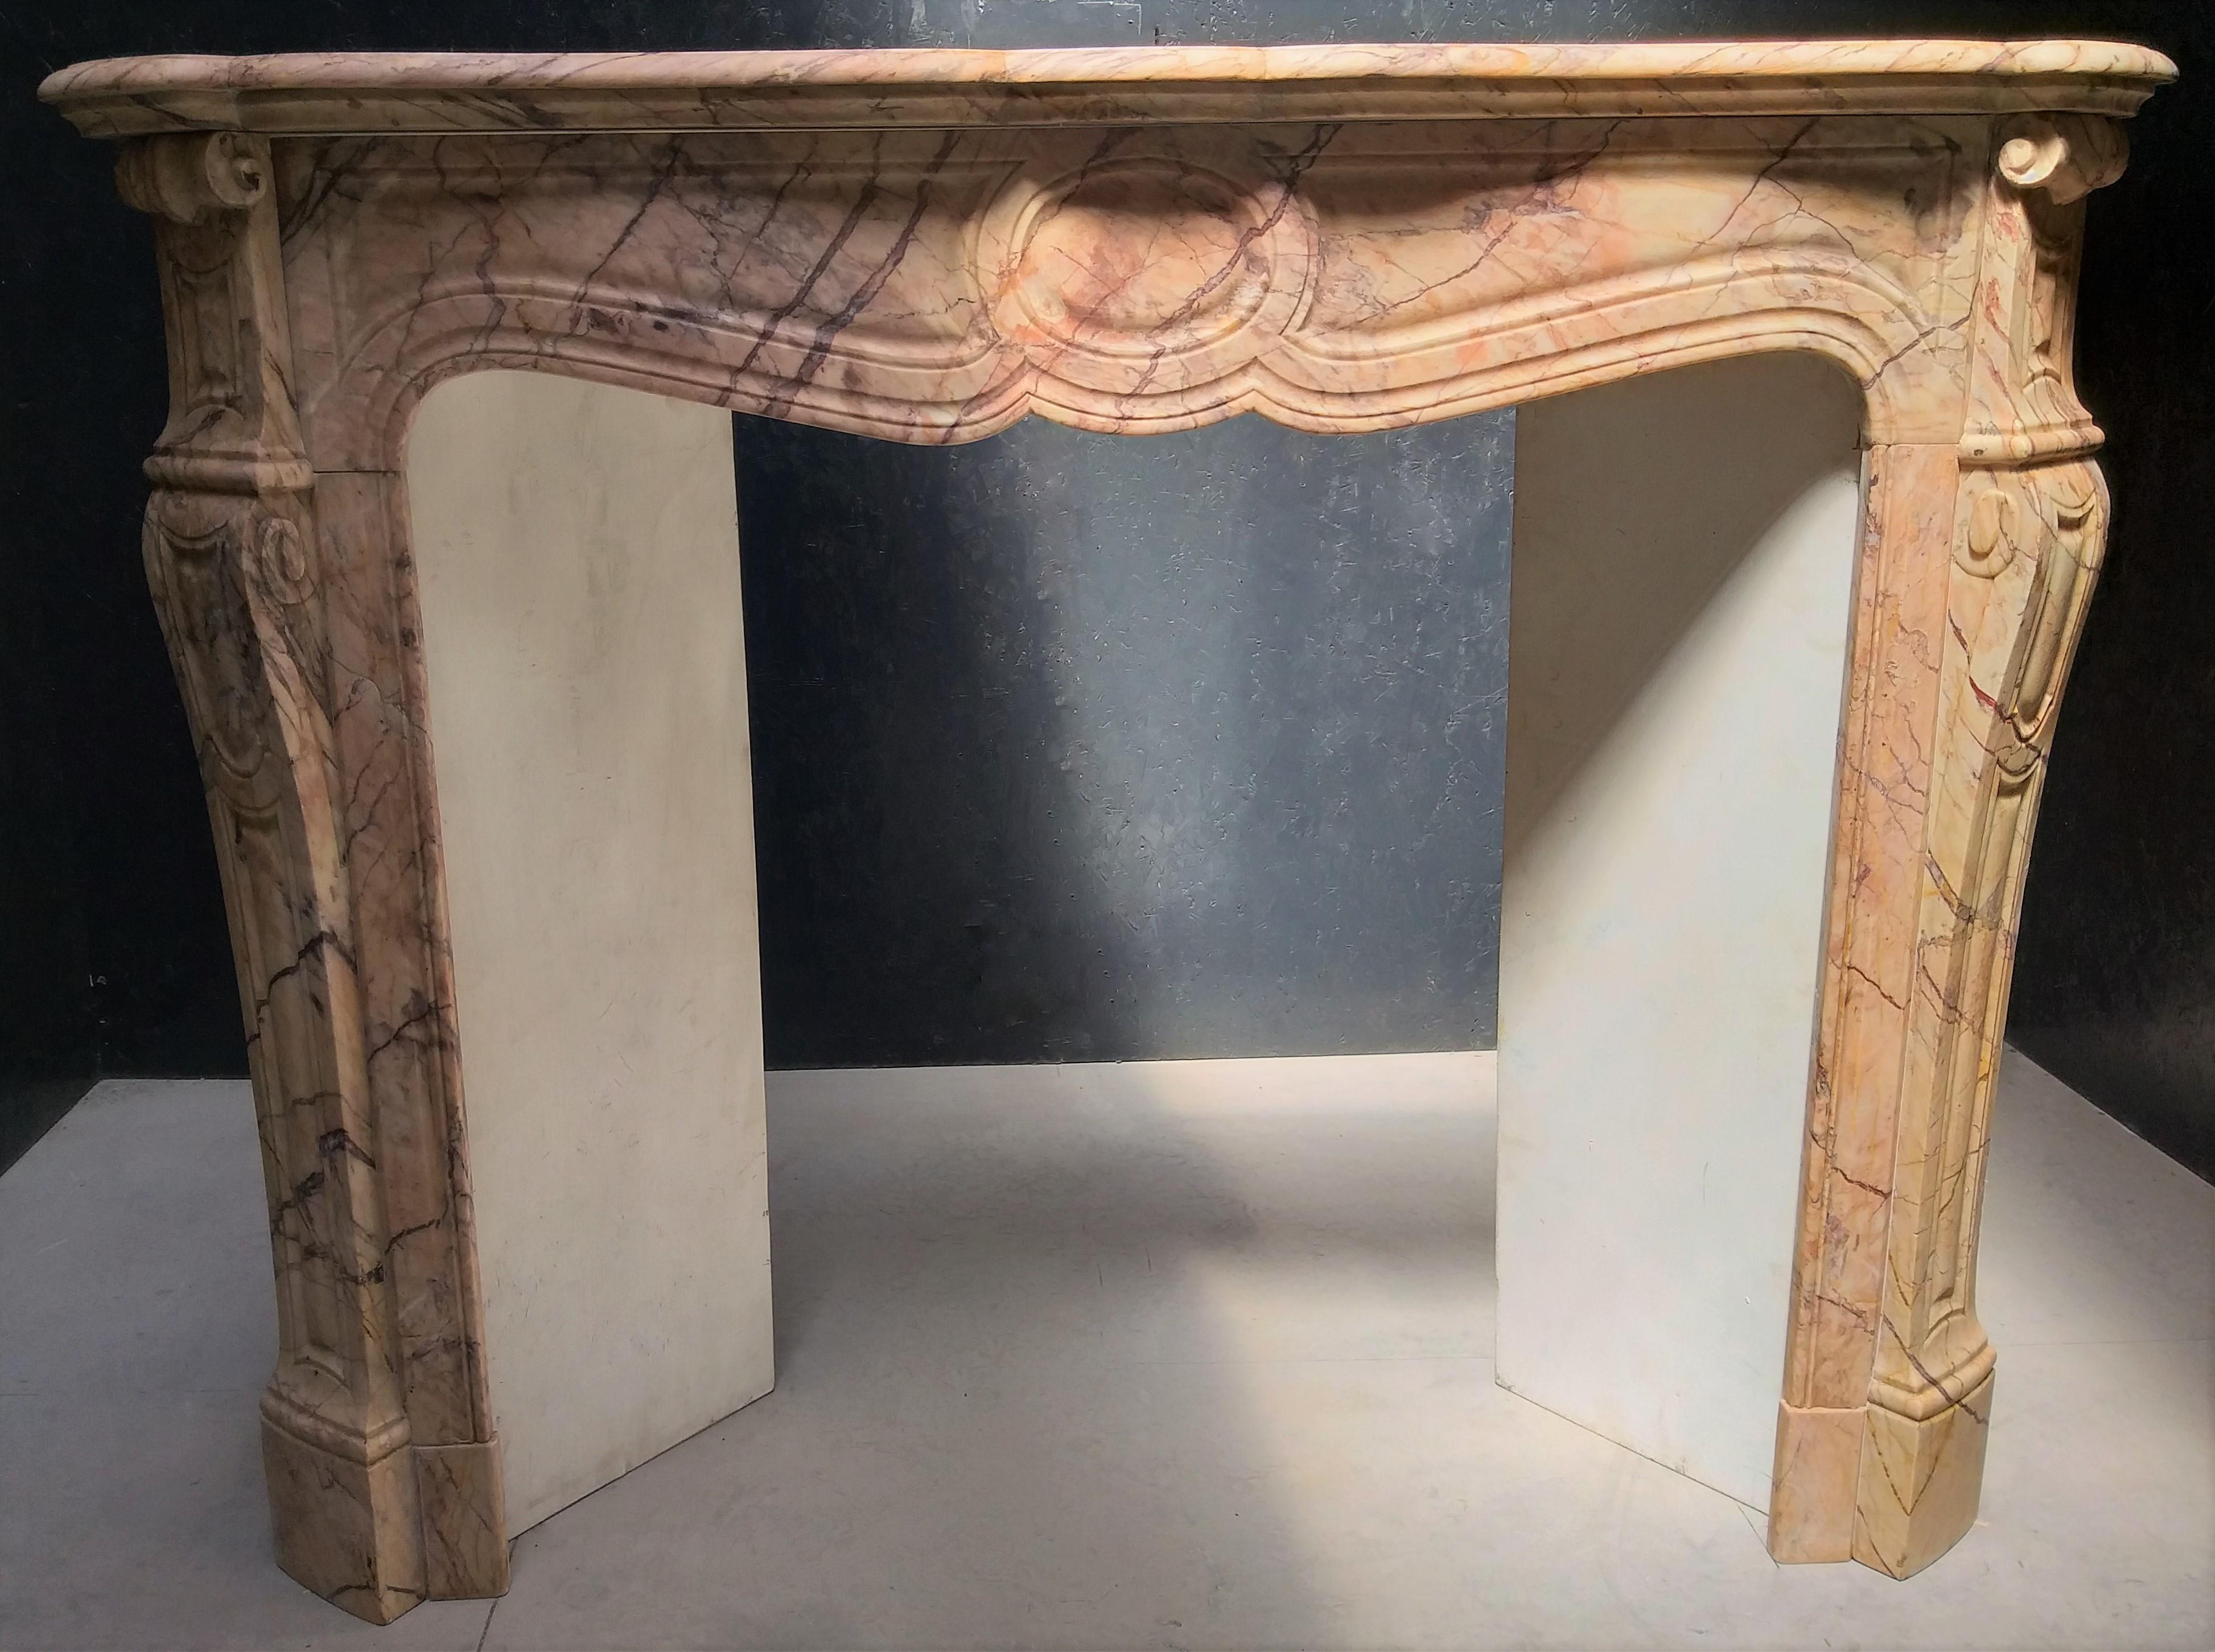 An elegant Pompadour fireplace, present with a powerful colored Skyros marble.  Made during the second half of the 19th century, France.
The model is a 'Pompadour': 'en l'honneur de madame'.  The shaped moulded shelf is resting above the frieze with